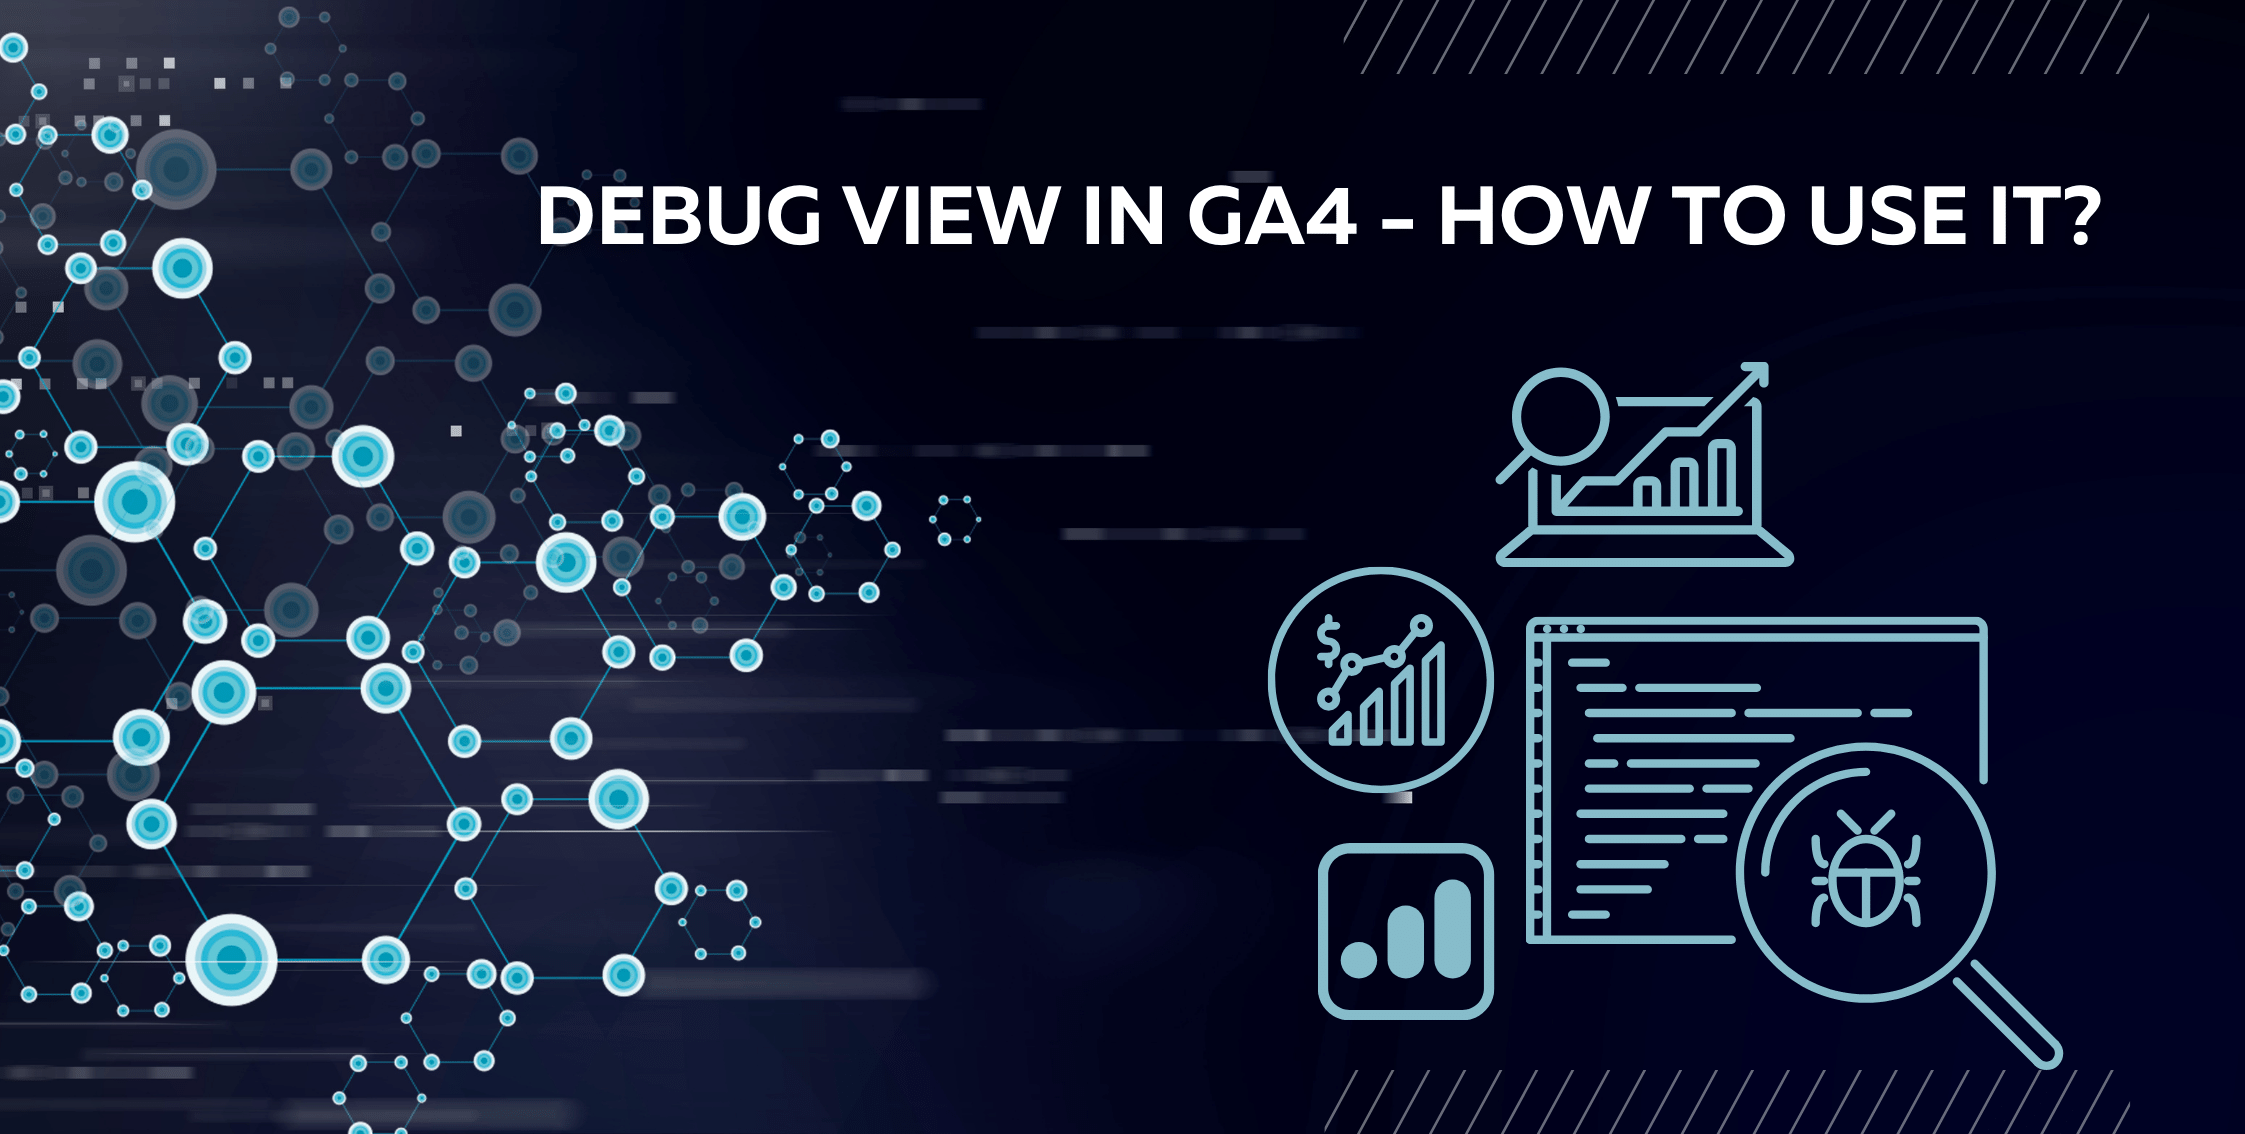 Debug View in GA4 - How to Use It?